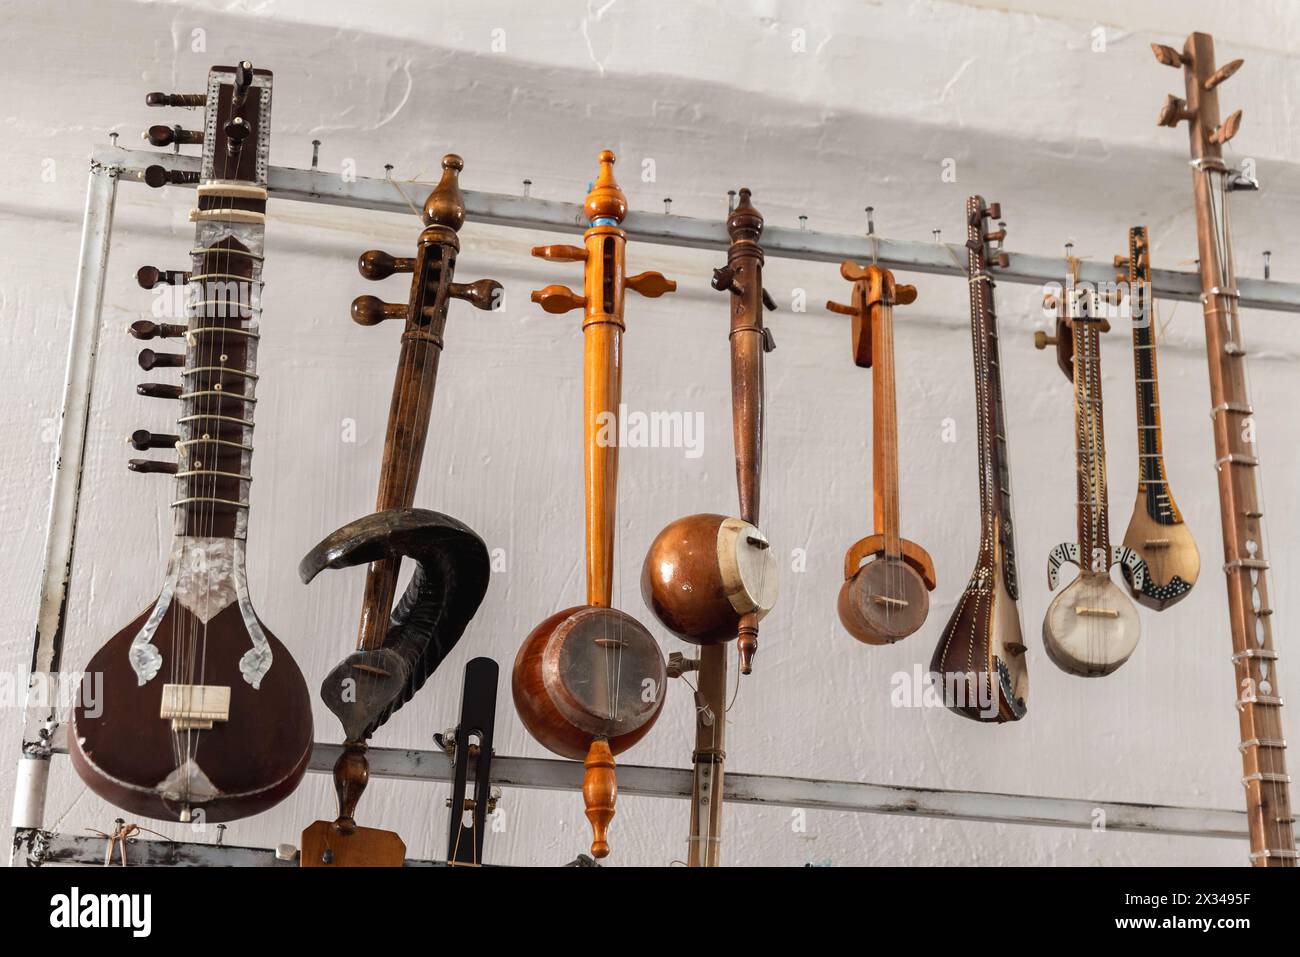 A variety of Central Asian stringed musical instruments are put up for sale at a bazaar in Bukhara Stock Photo